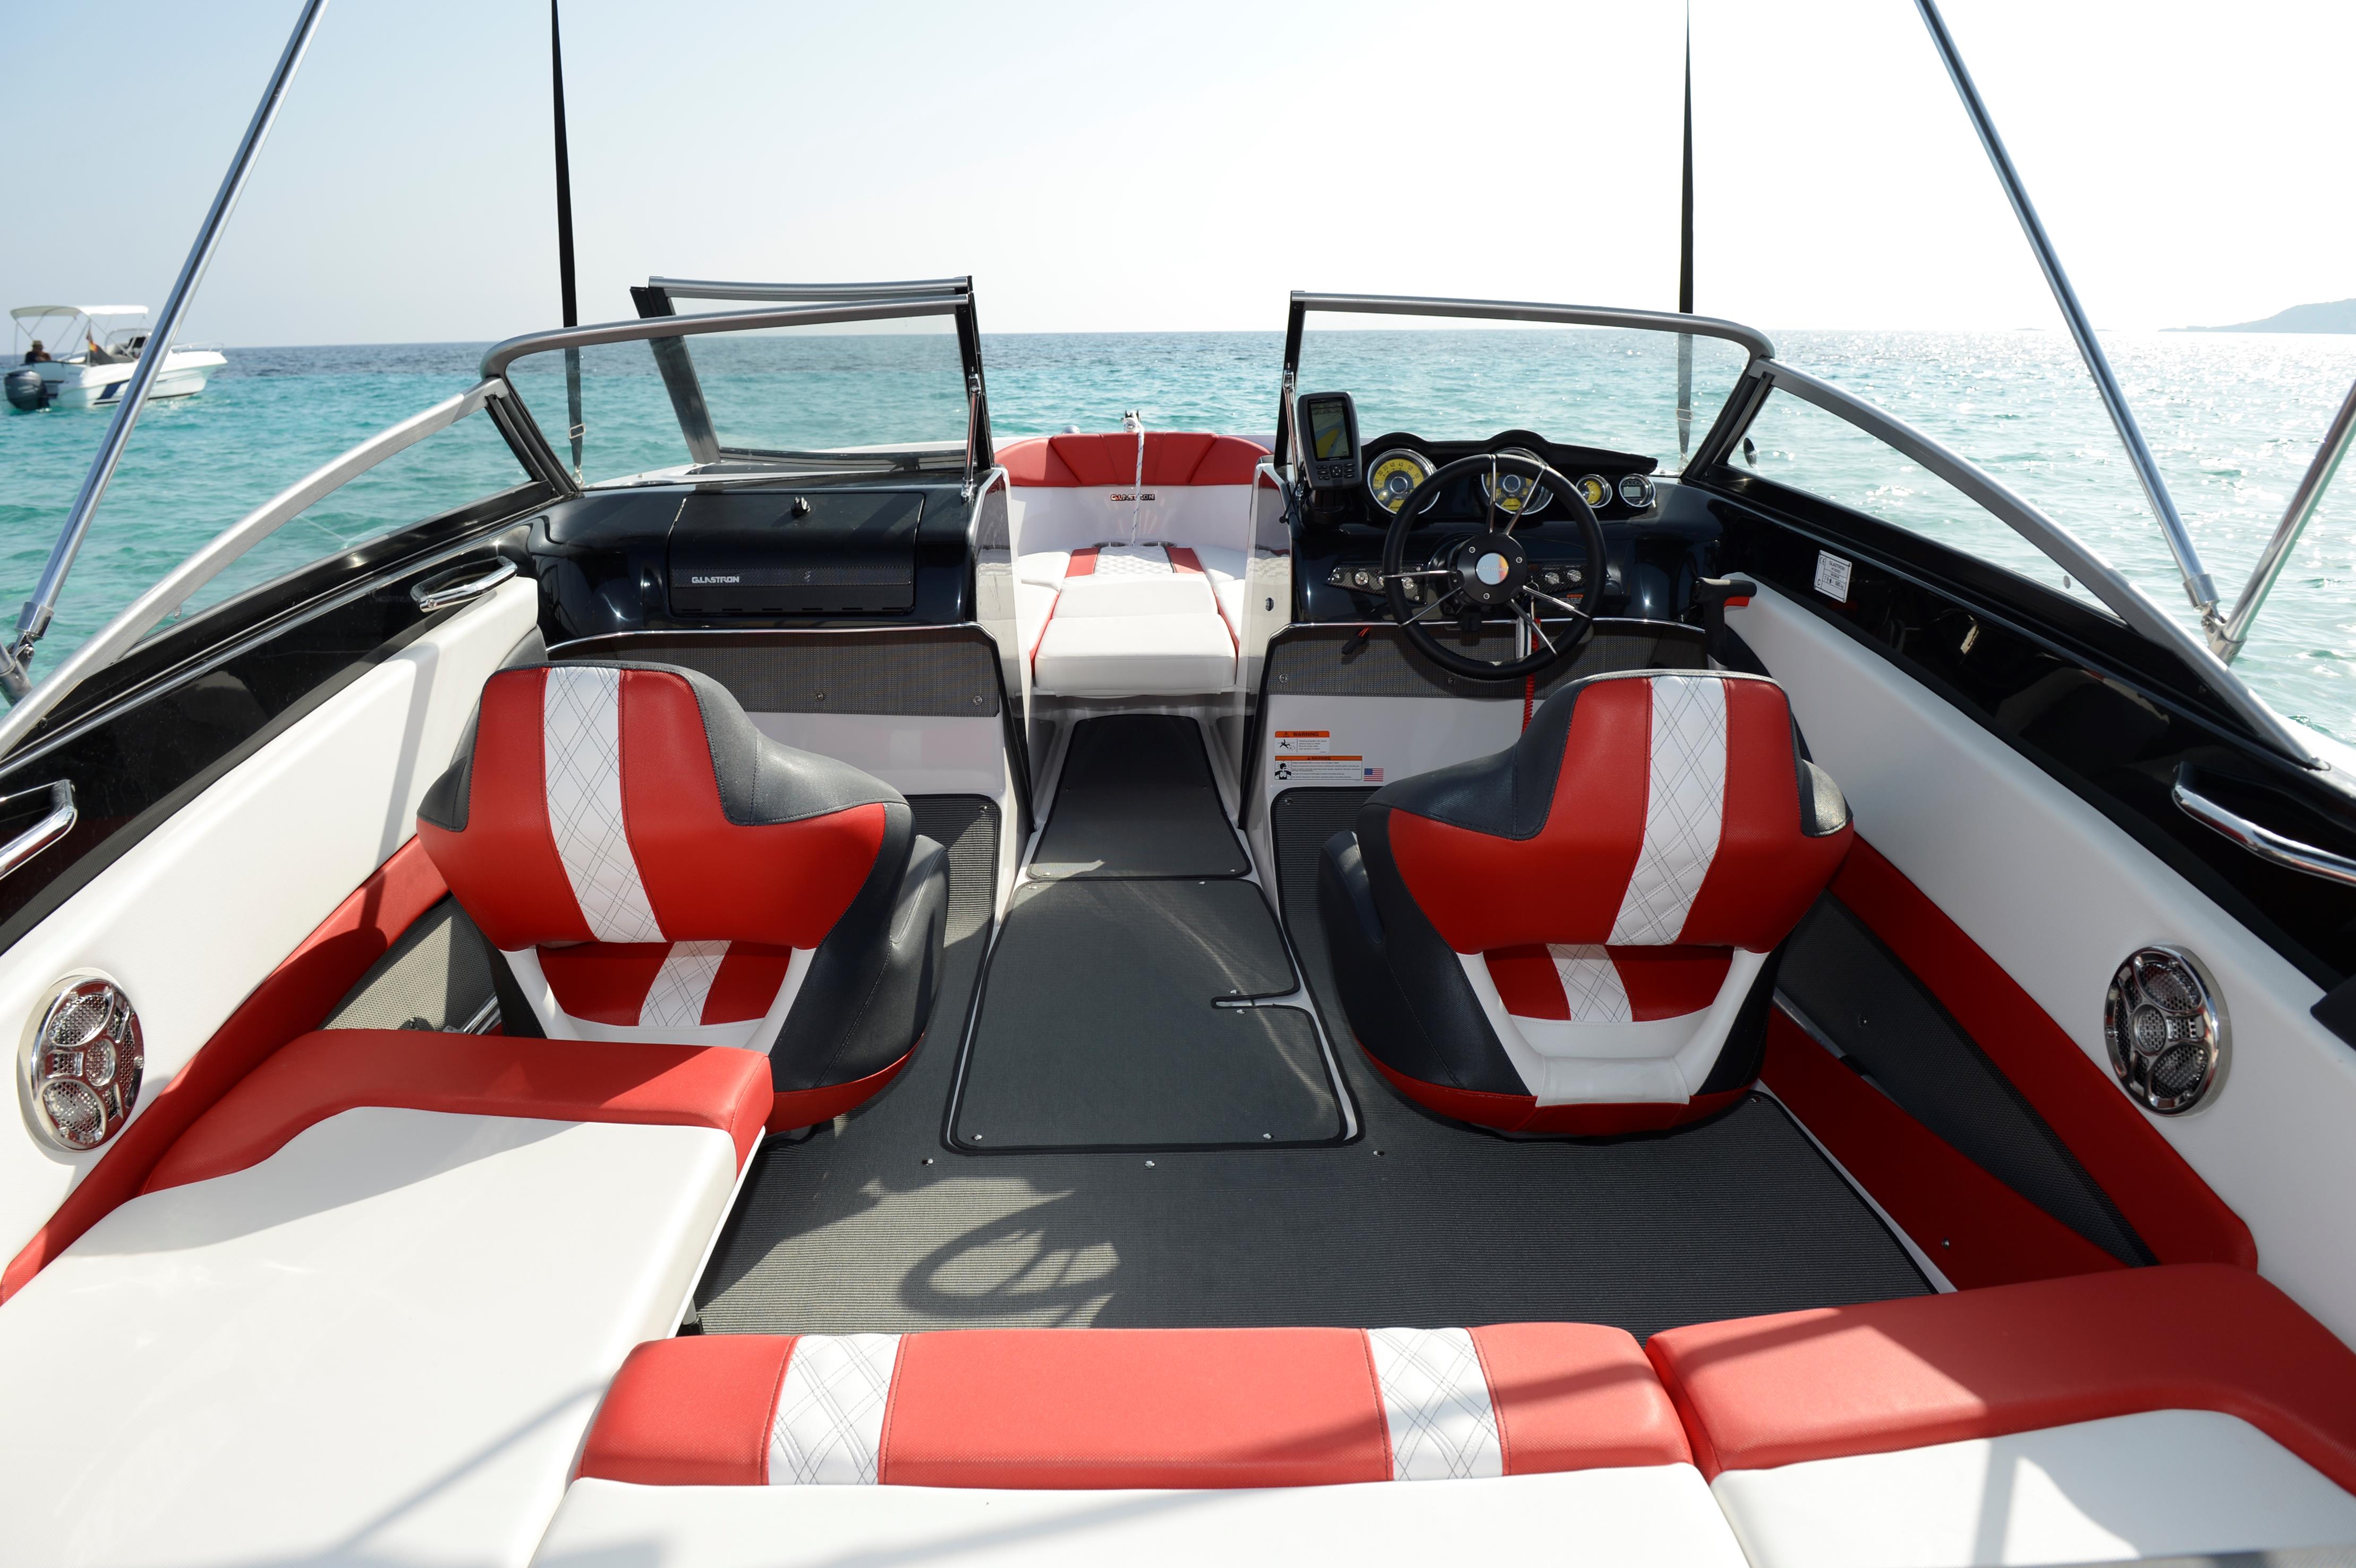 Glastron 205 GTS bareboat charter (without captain)